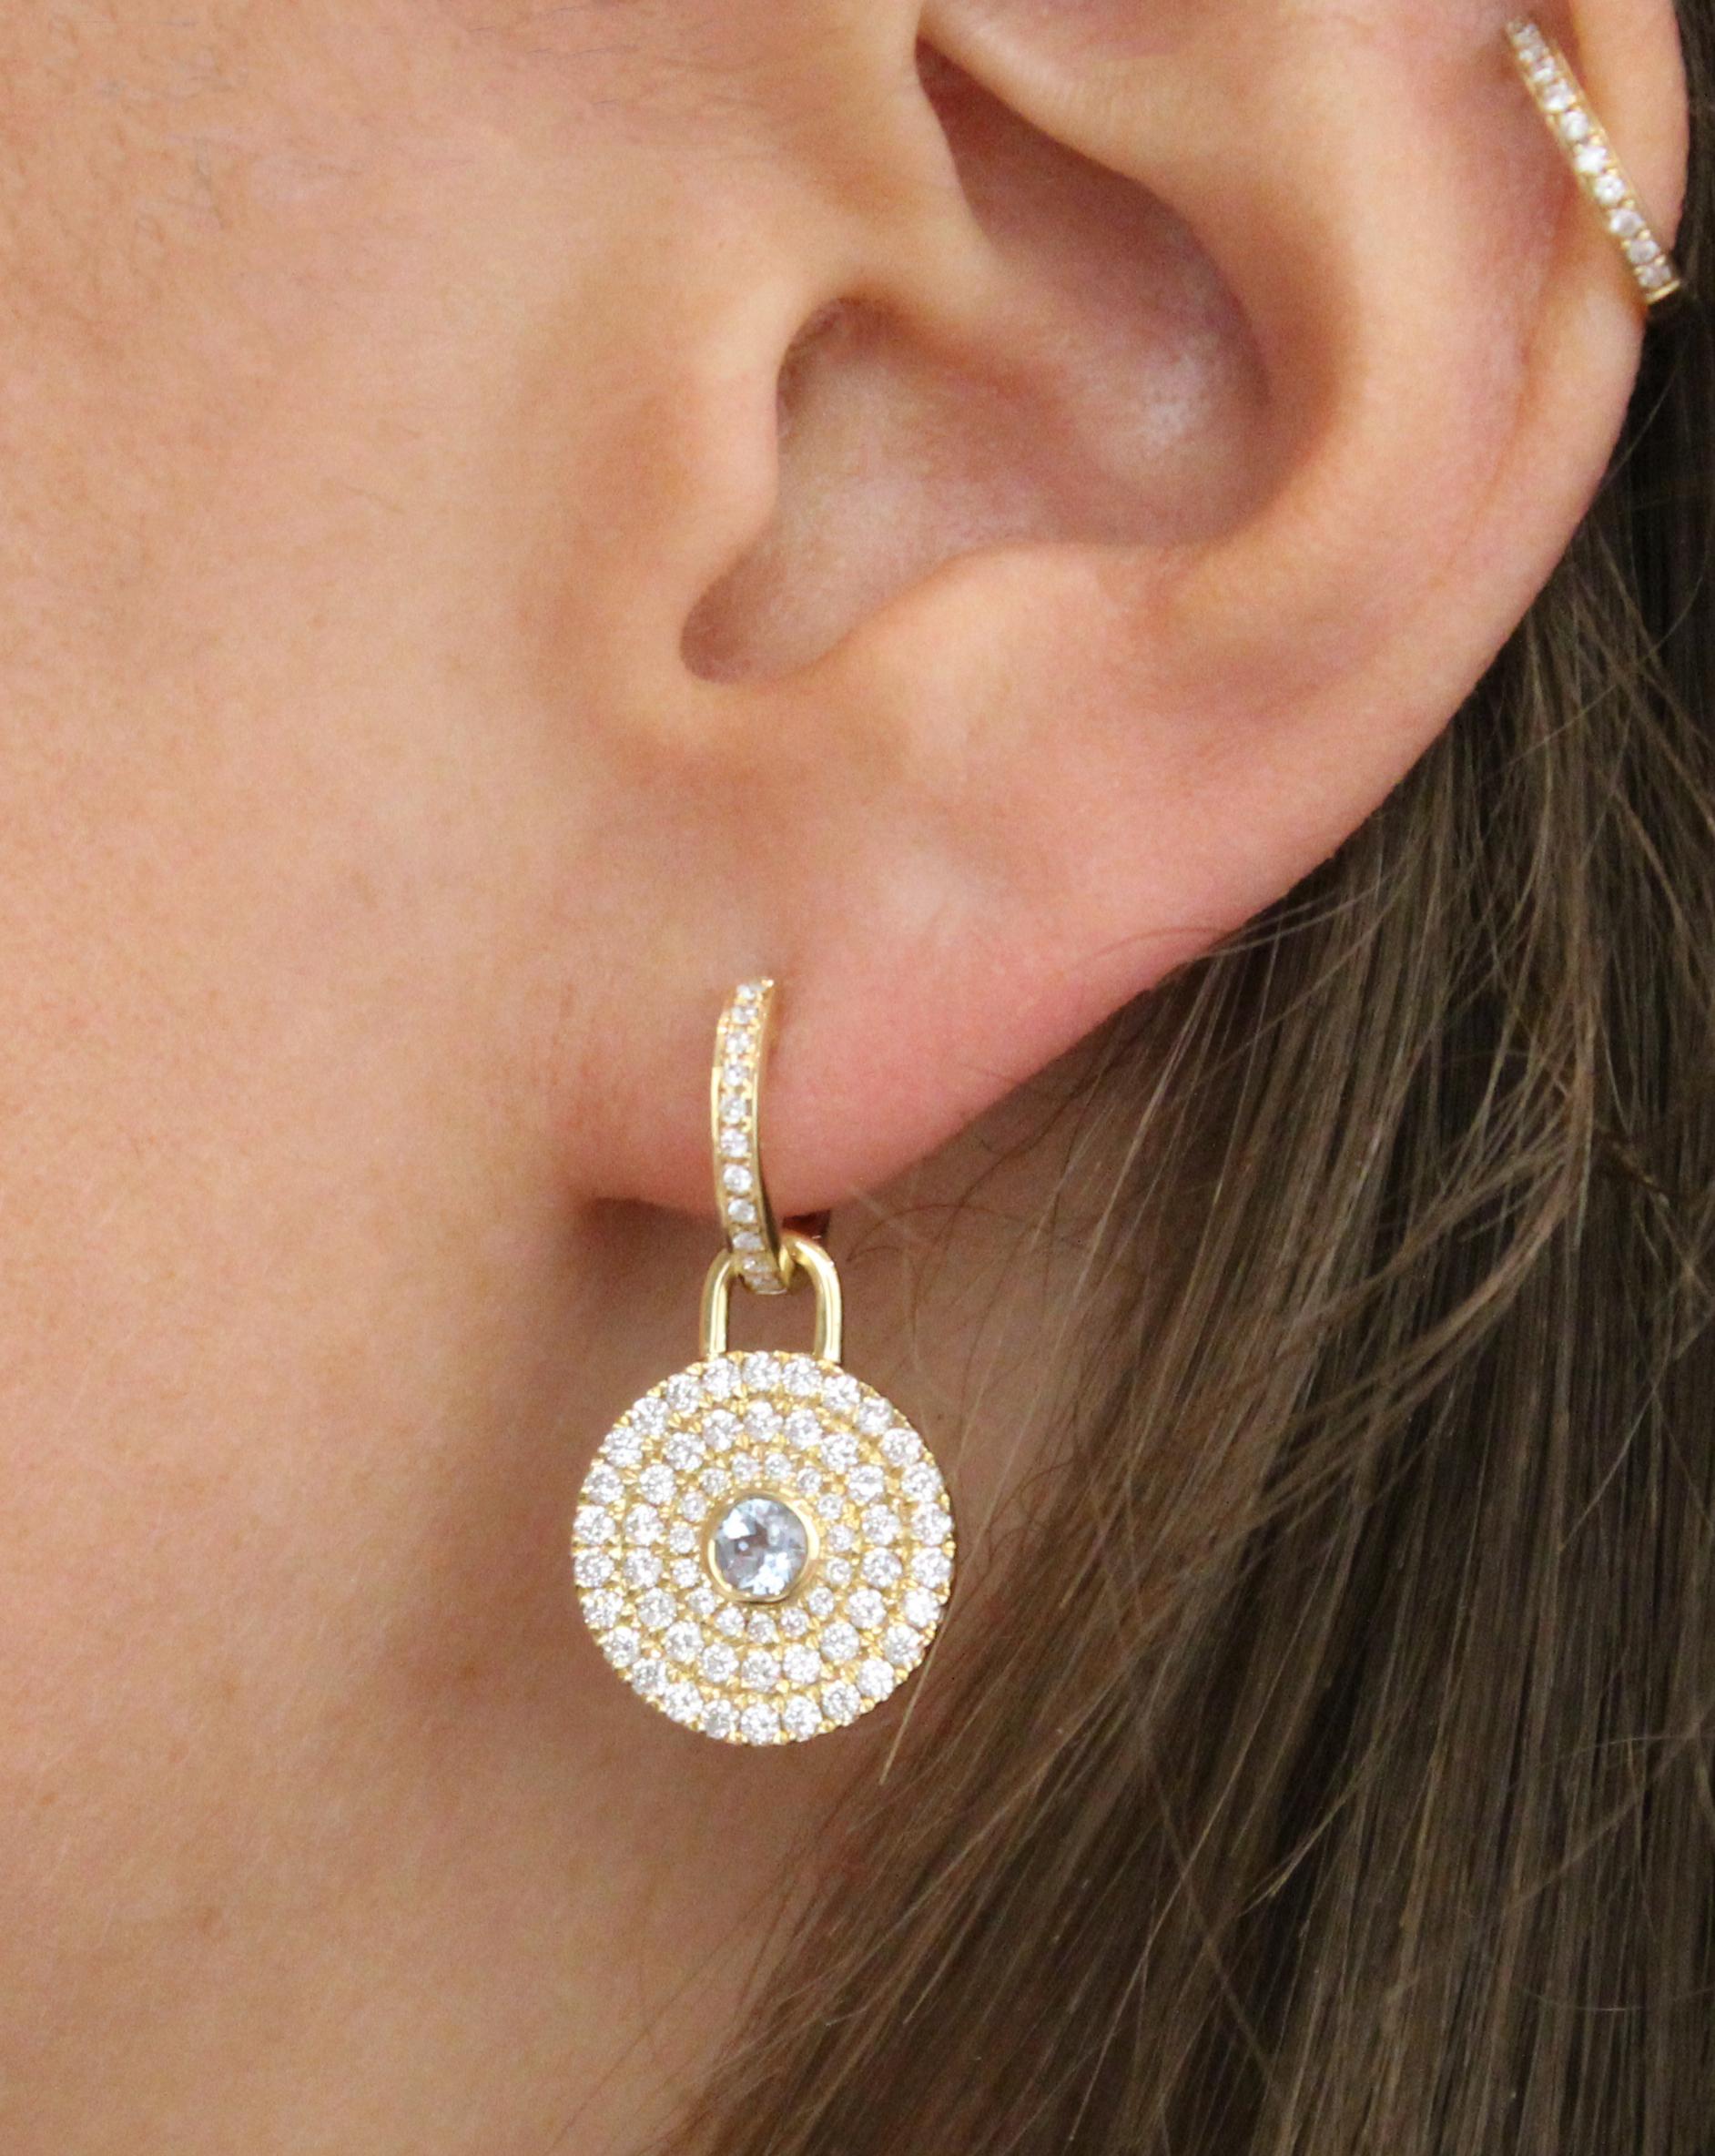 This beautiful pair of earrings consist of two parts: An extremely versatile 18ct Yellow Gold Diamond hoop and a detachable drop featuring a central Blue Topaz (0.37ct) stone, surrounded by Diamond (1.22ct) halos. This enables you to mix and match